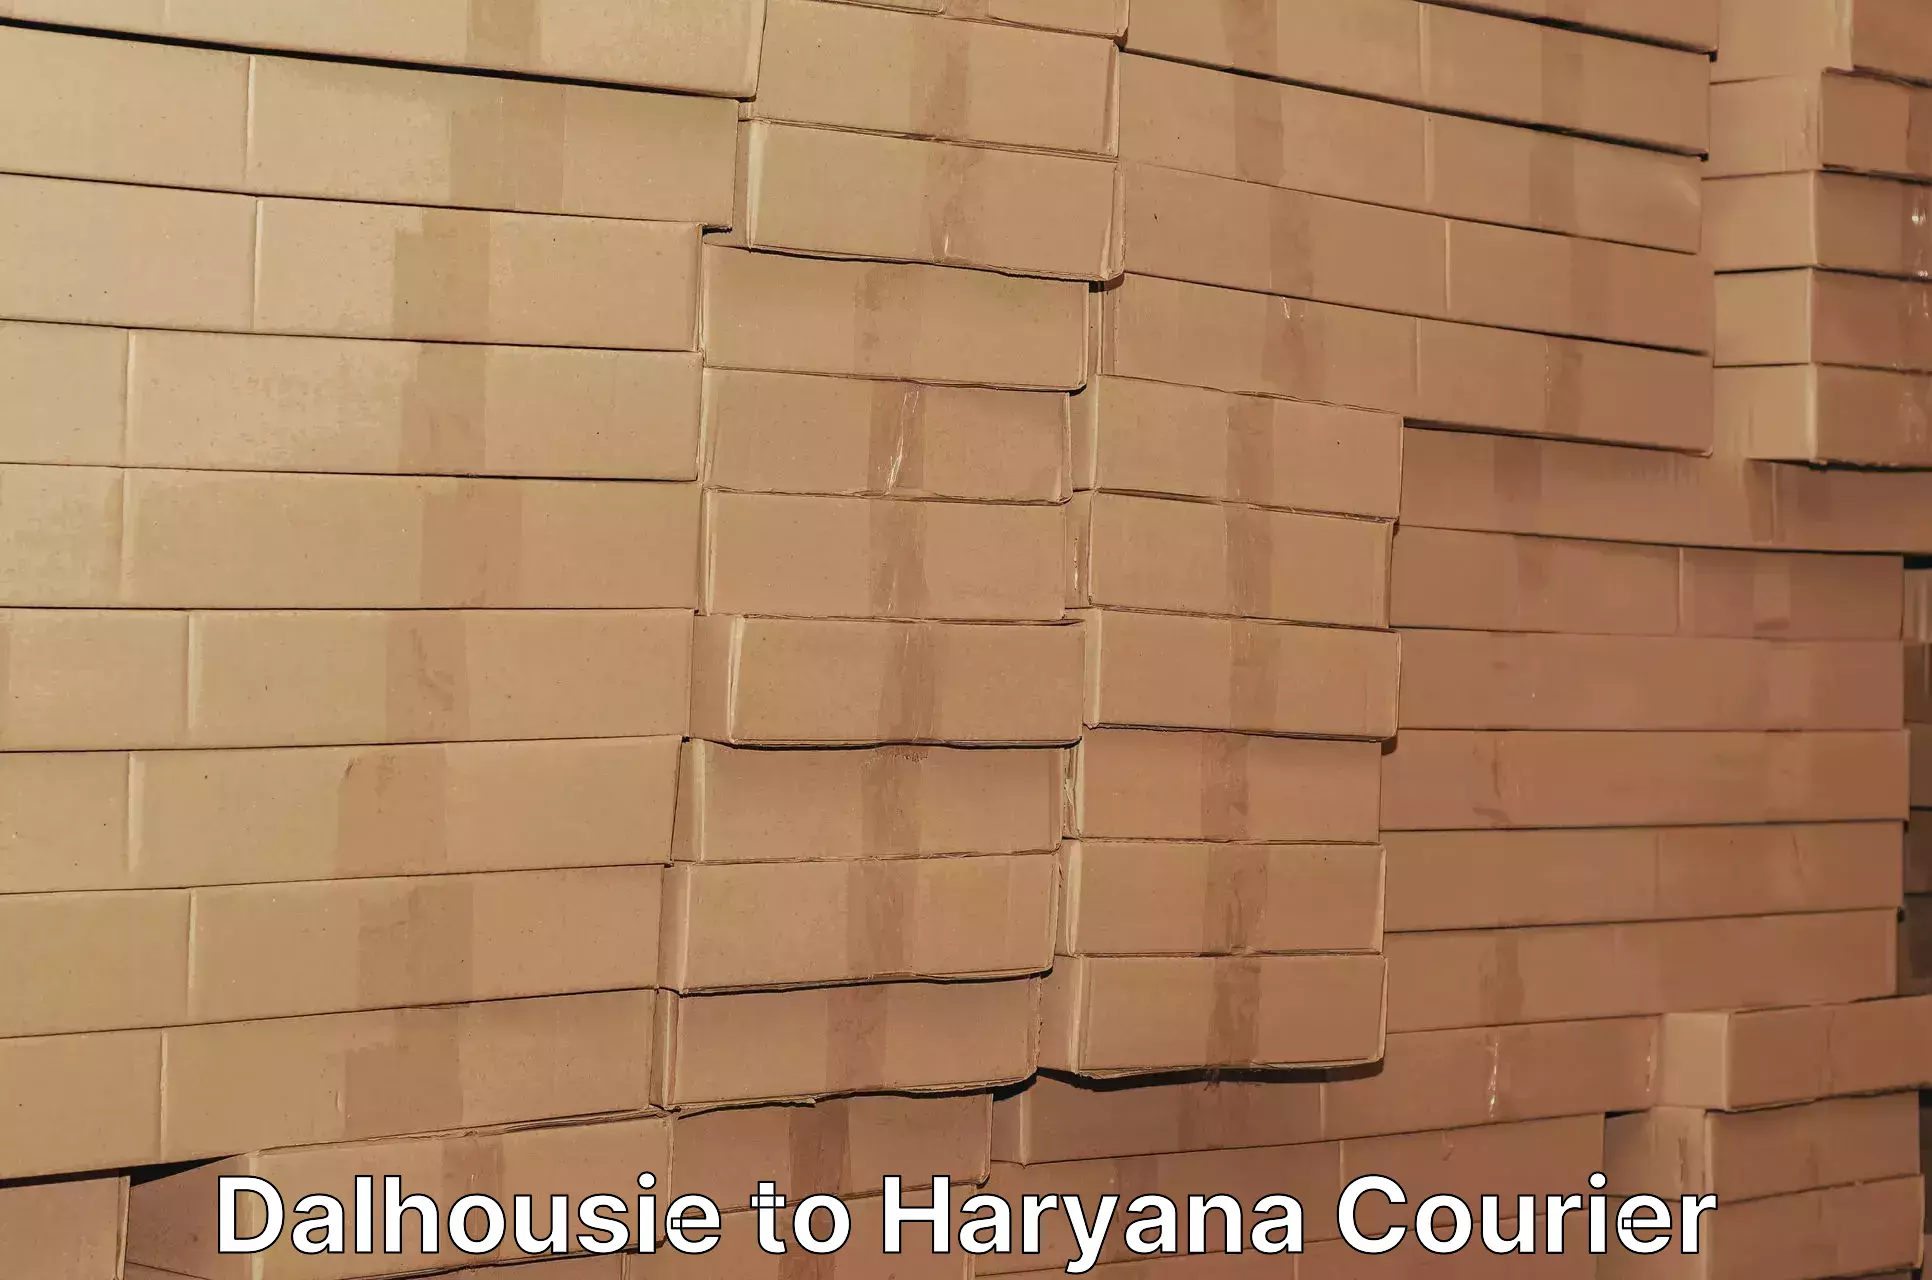 Local courier options Dalhousie to Haryana